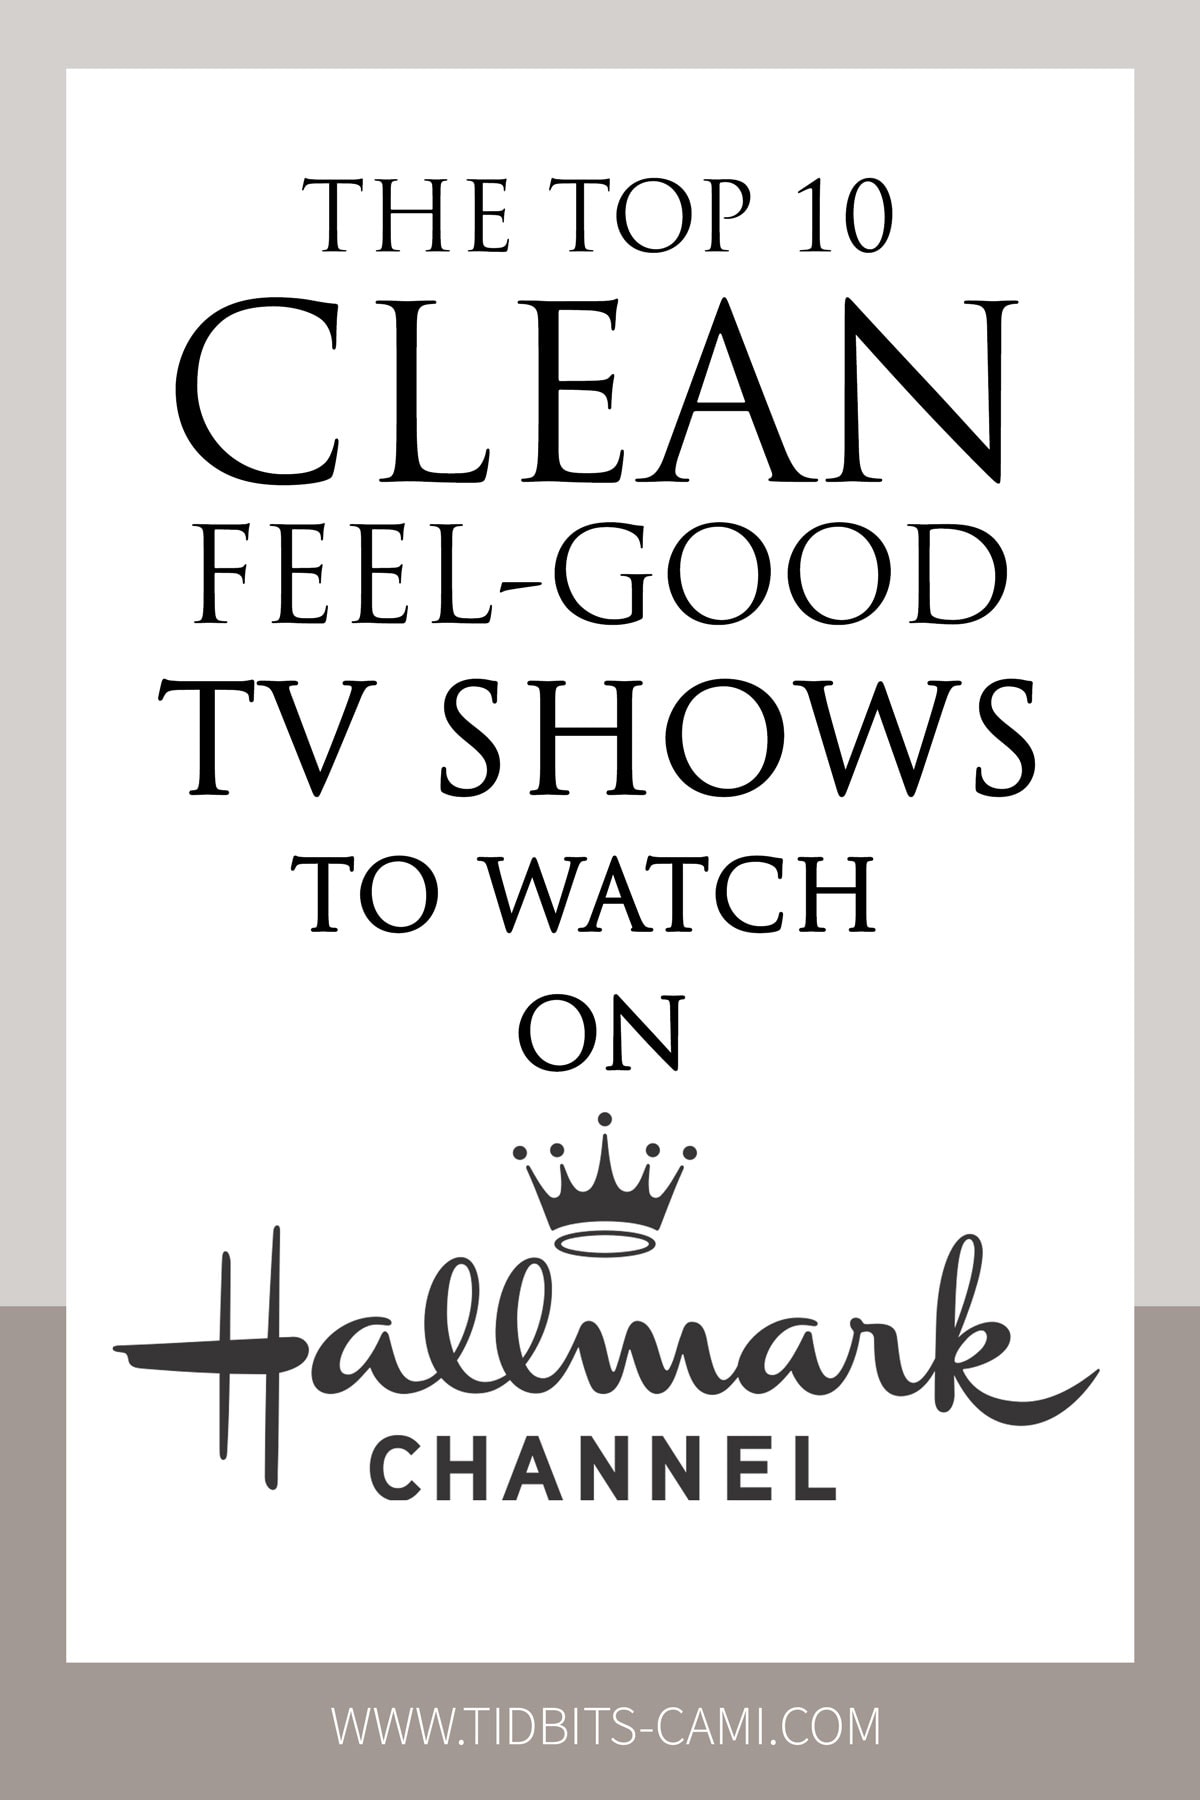 The Top 10 Clean Feel-Good TV Shows to Watch on Hallmark